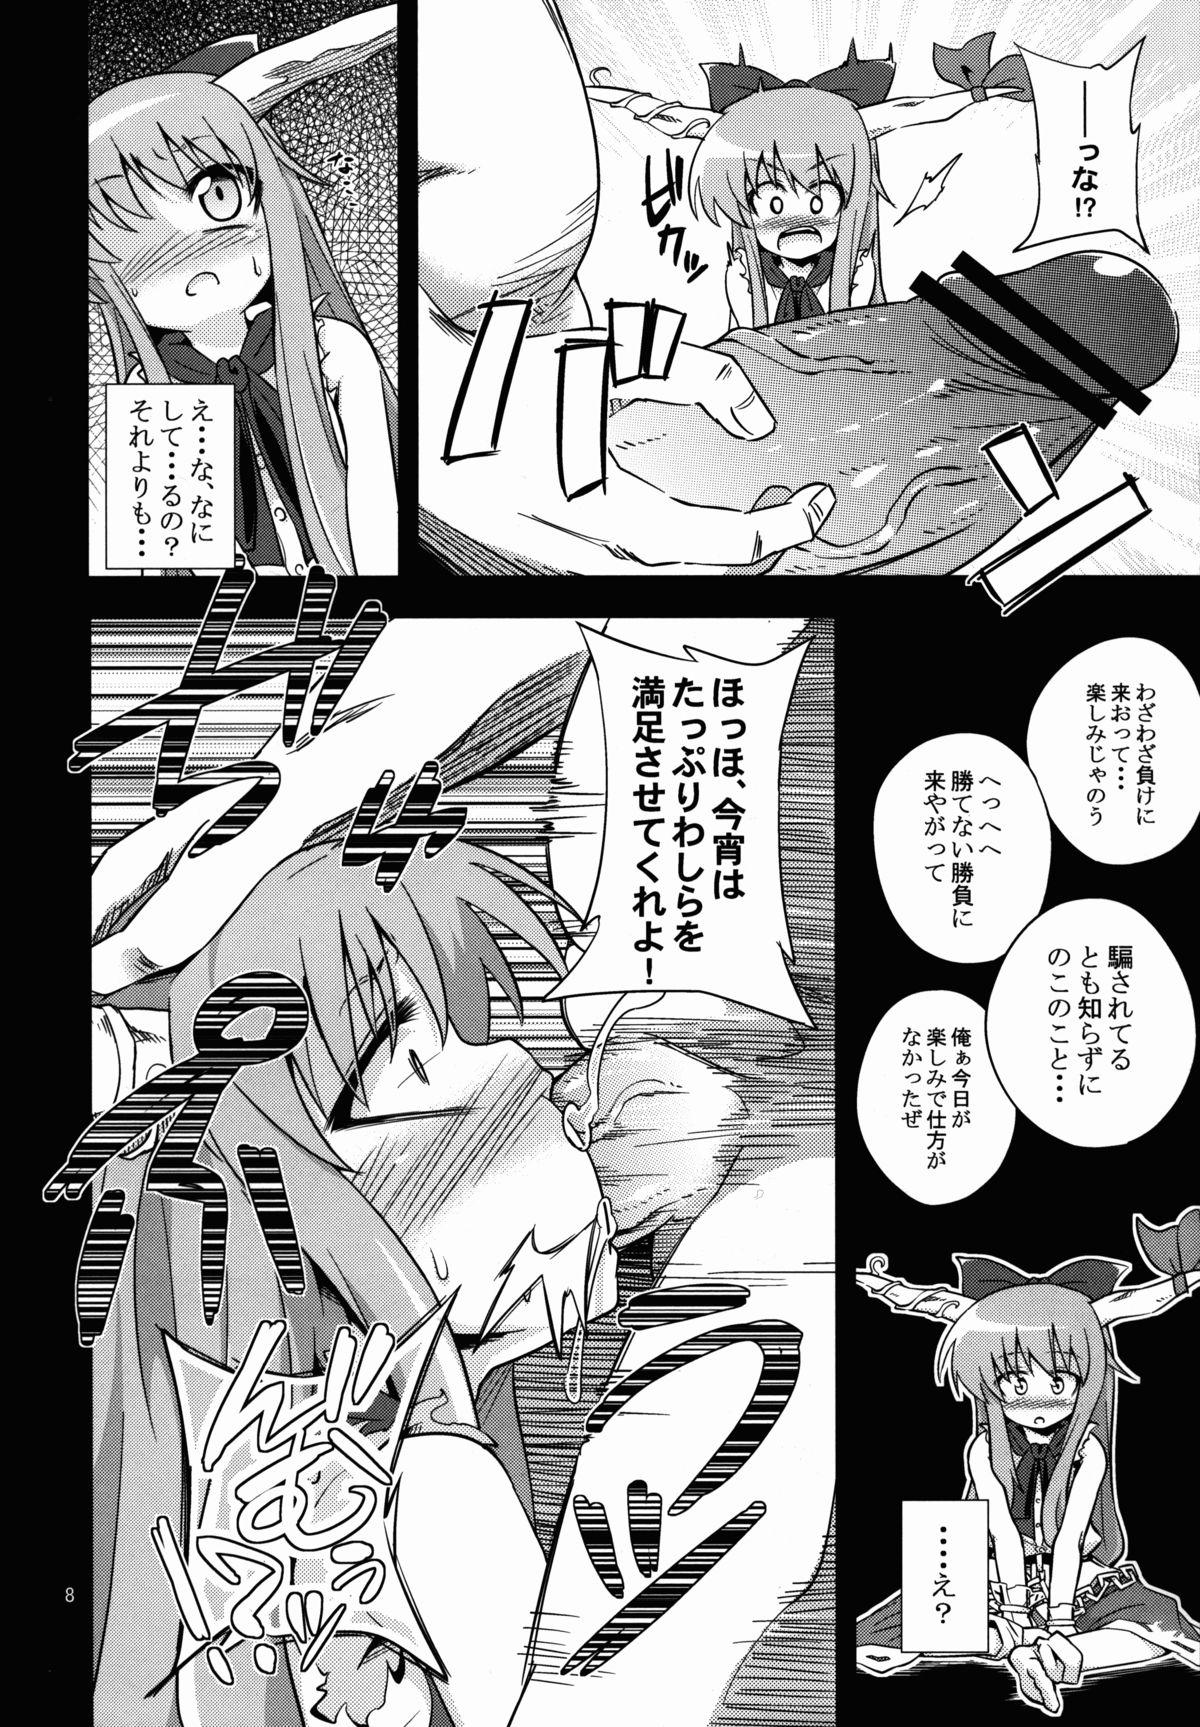 Red 鬼犯嘘犯喜 - Touhou project Cheat - Page 8